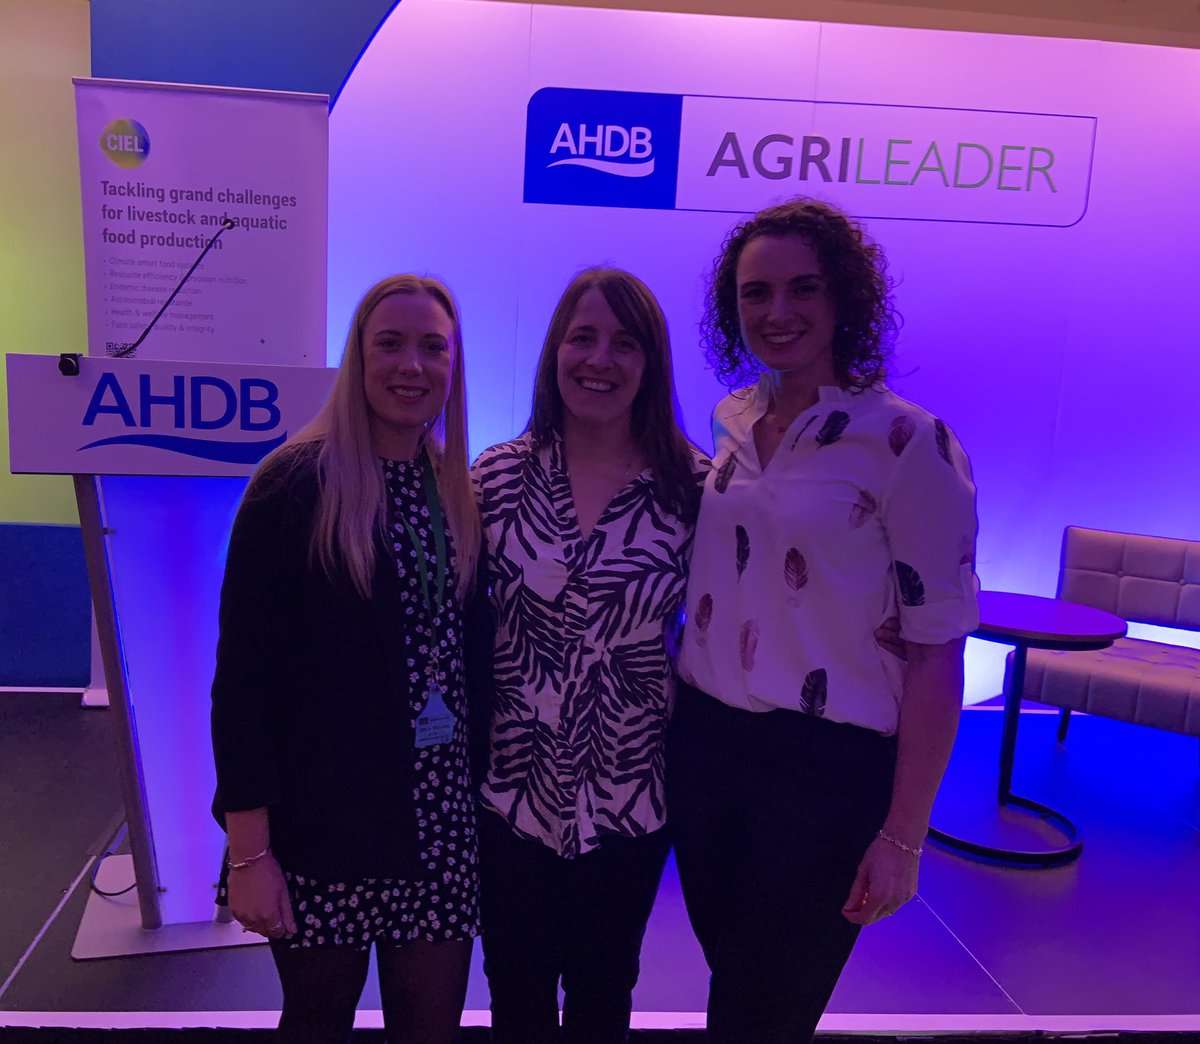 #agrileaderforum23 continues with a fantastic evening with @katymc10